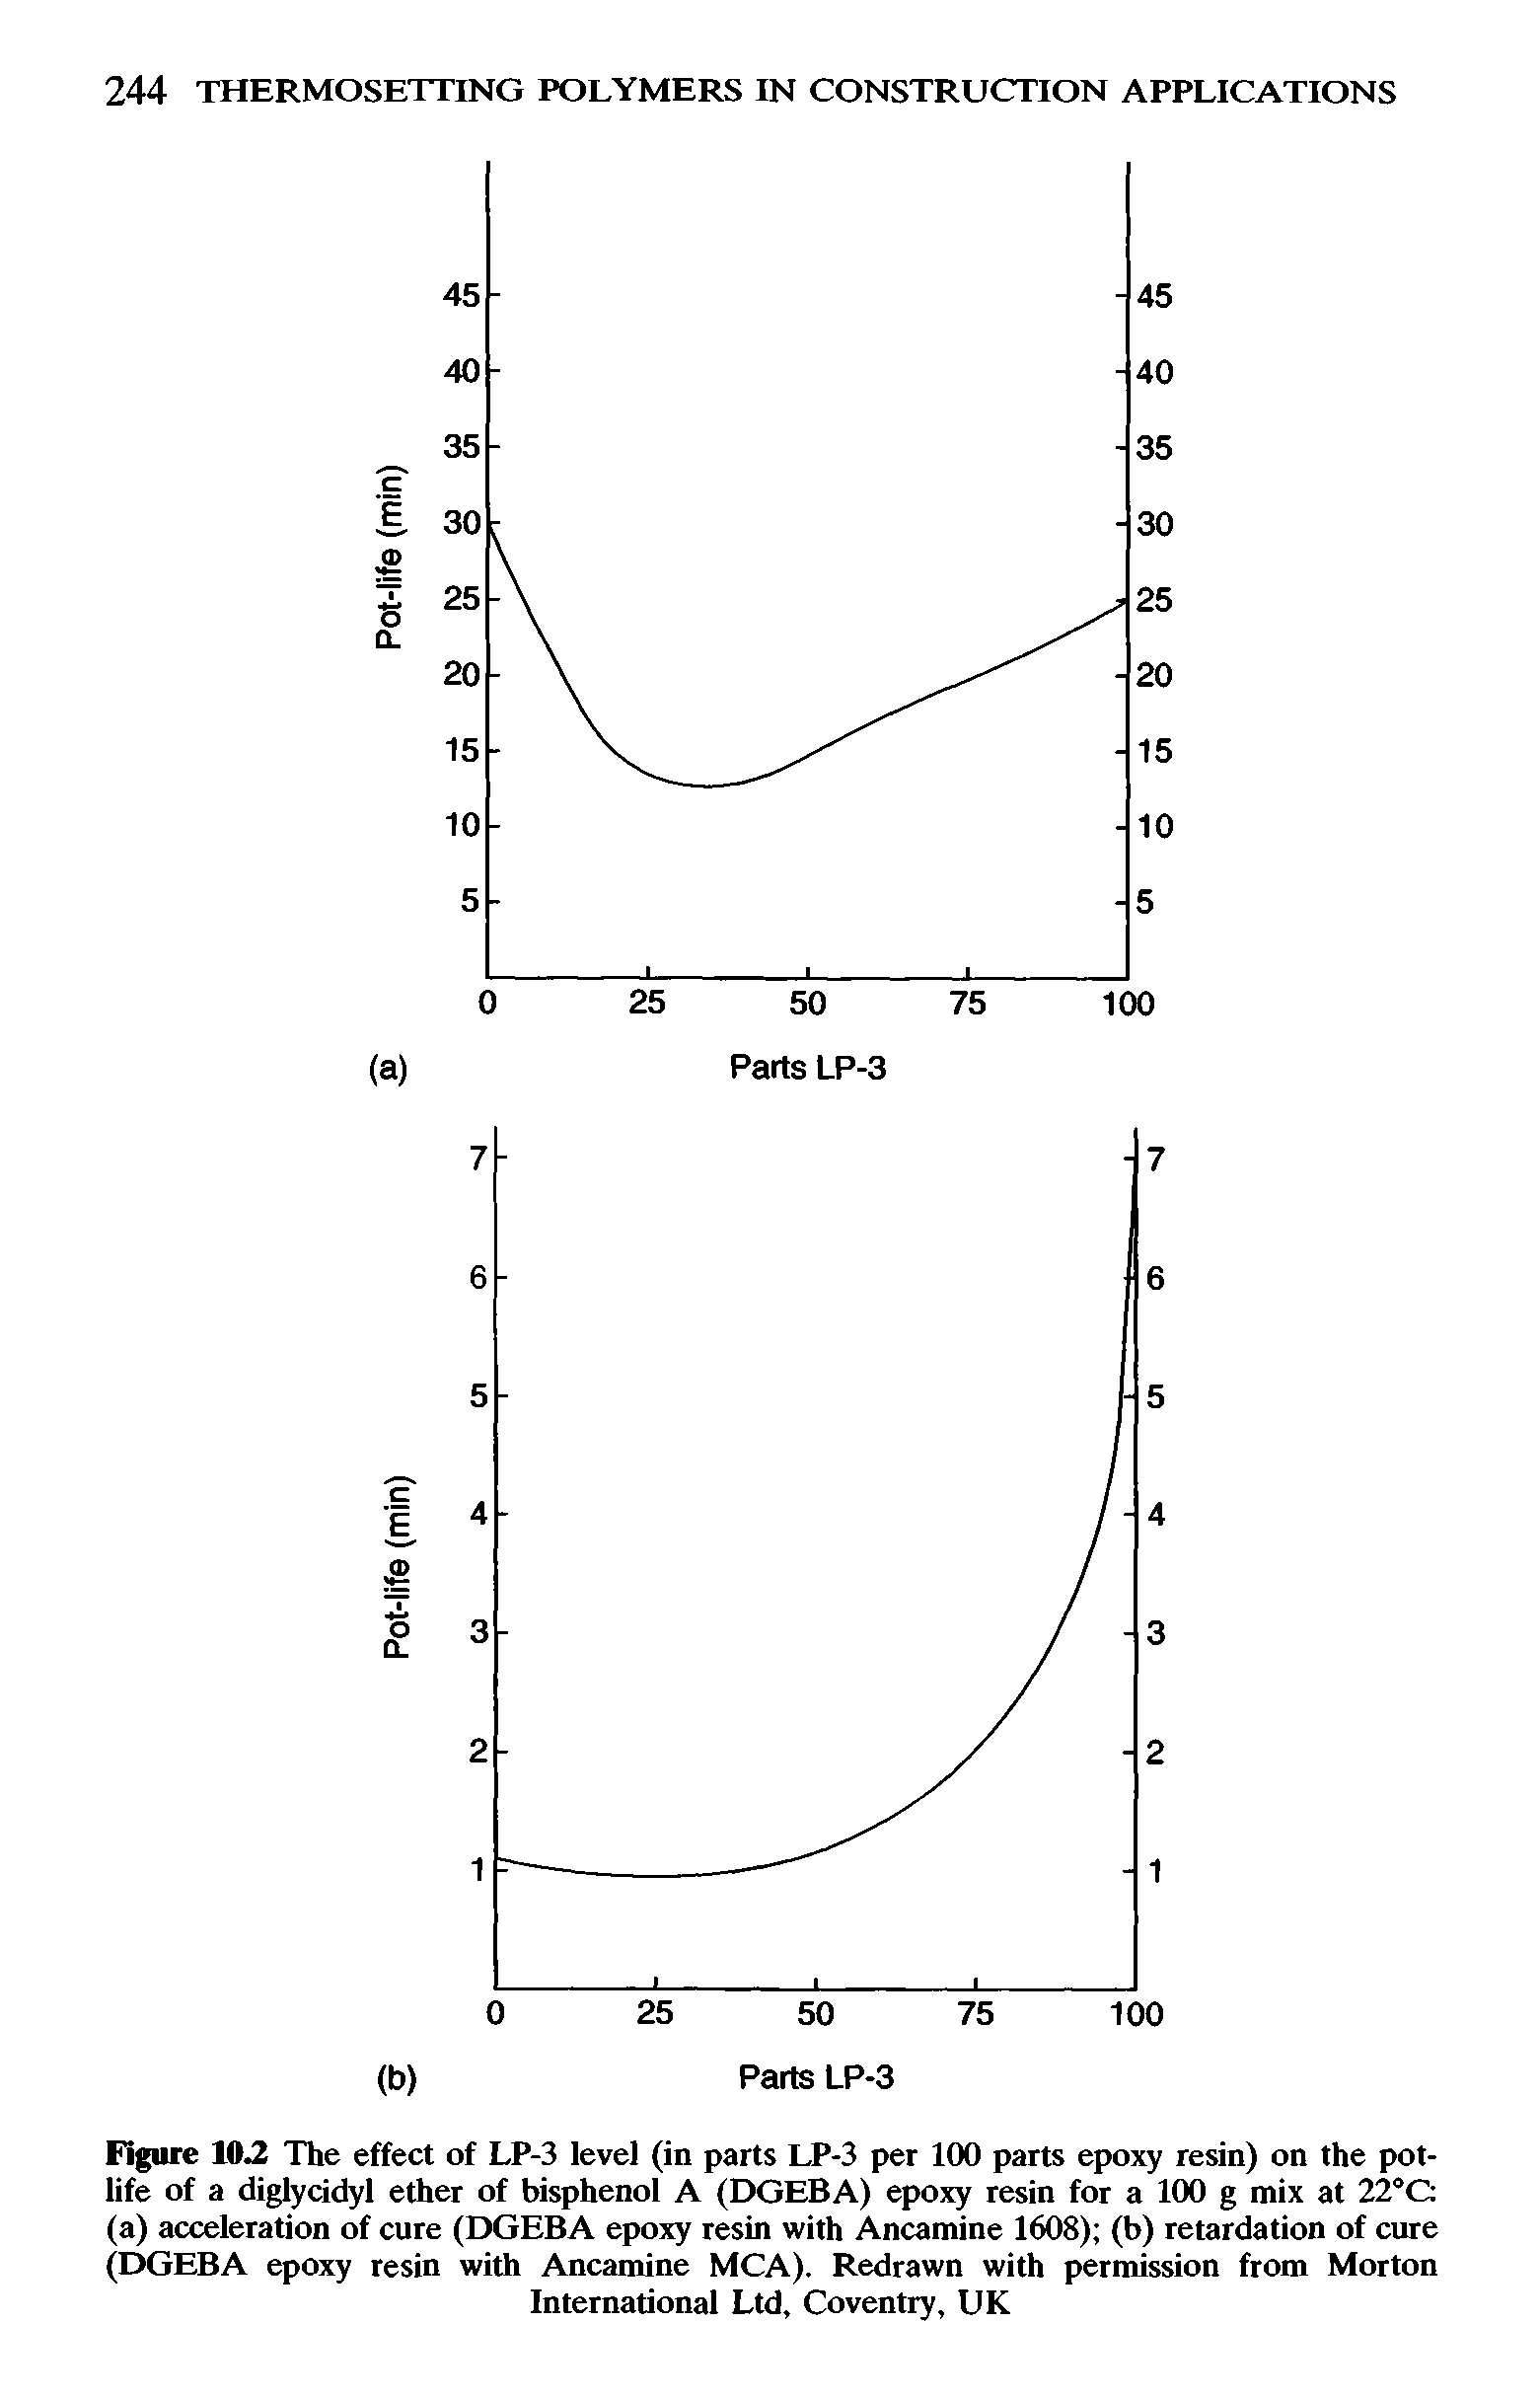 Figure 10 The effect of LP-3 level (in parts LP-3 per 100 parts epoxy resin) on the pot-life of a diglycidyl ether of bisphenol A (DGEBA) epoxy resin for a 100 g mix at 22°C (a) acceleration of cure (DGEBA epoxy resin with Ancamine 1608) (b) retardation of cure (DGEBA epoxy resin with Ancamine MCA). Redrawn with permission from Morton International Ltd, Coventry, UK...